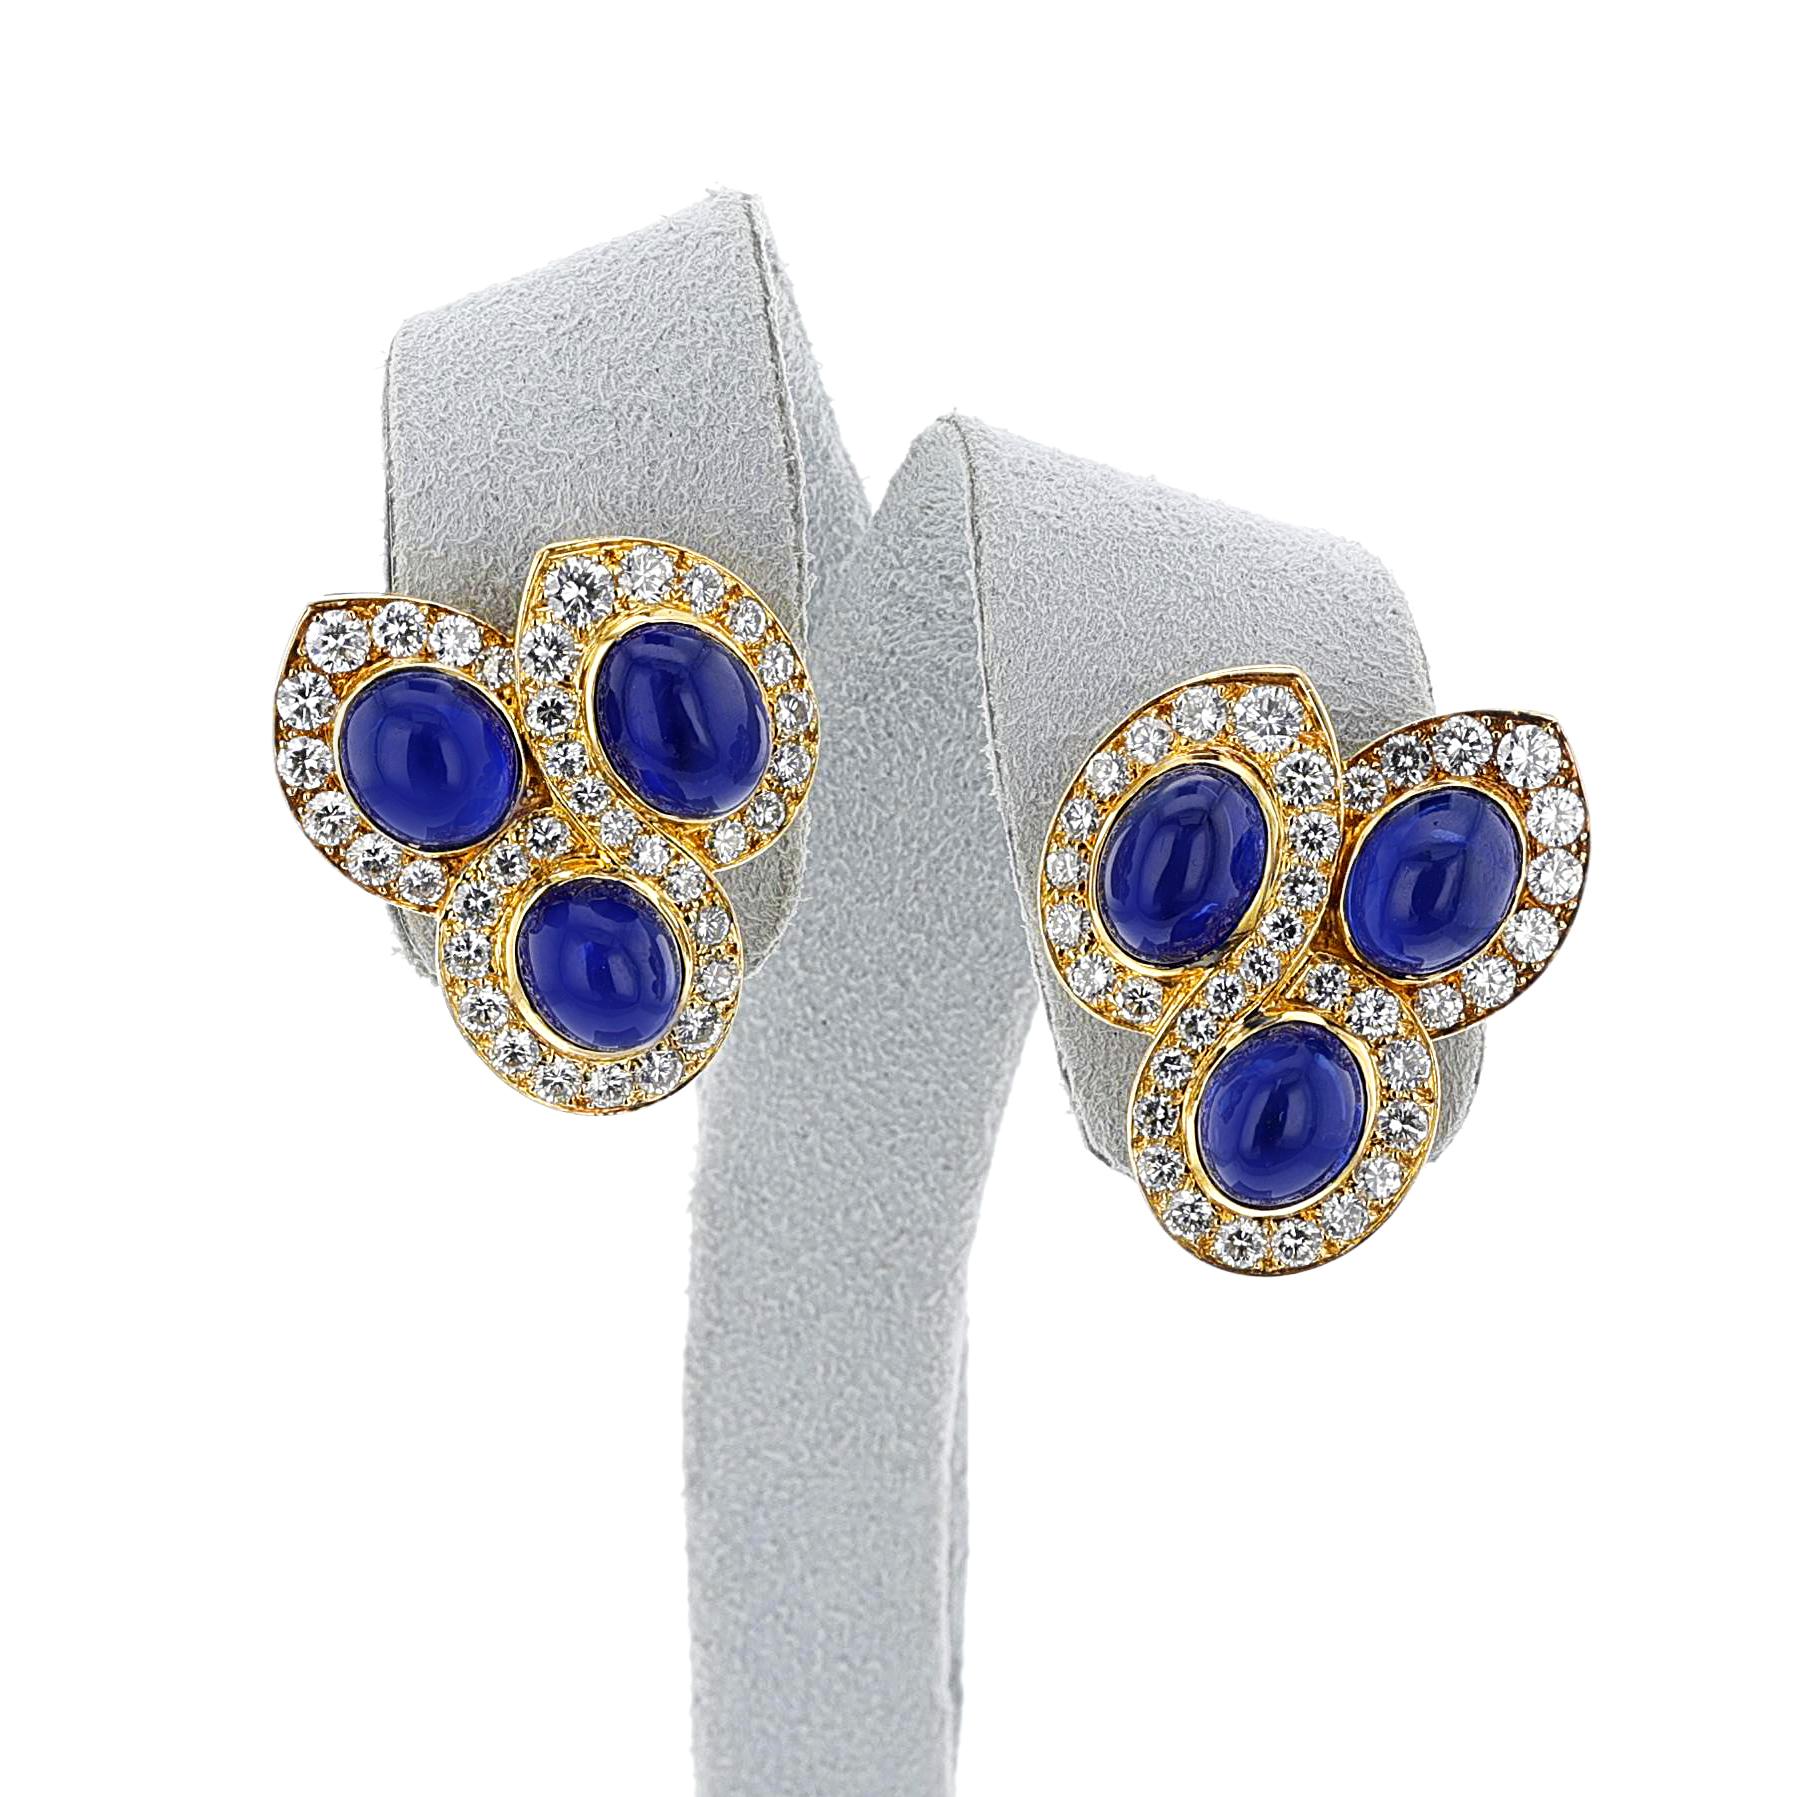 Van Cleef & Arpels Natural Sapphire Cabochon and Diamond Earrings, 18k In Excellent Condition For Sale In New York, NY